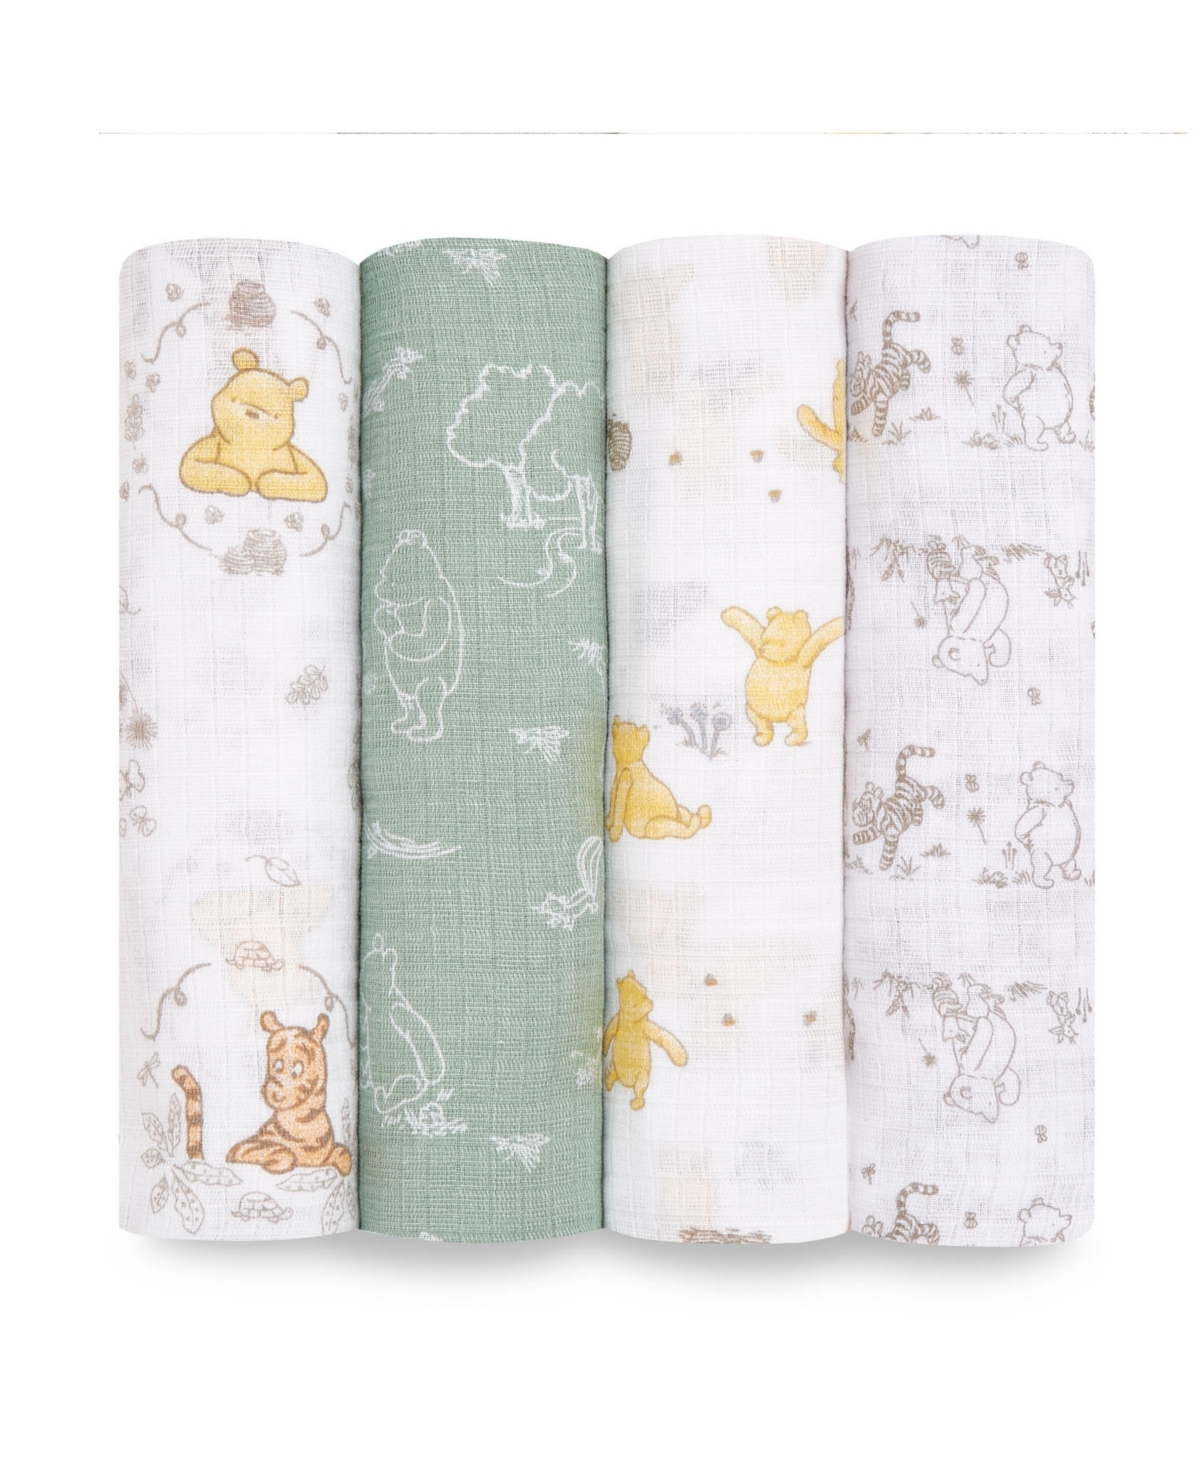 Aden By Aden + Anais Winnie And Friends Swaddle Blankets, Pack Of 4 In Multi